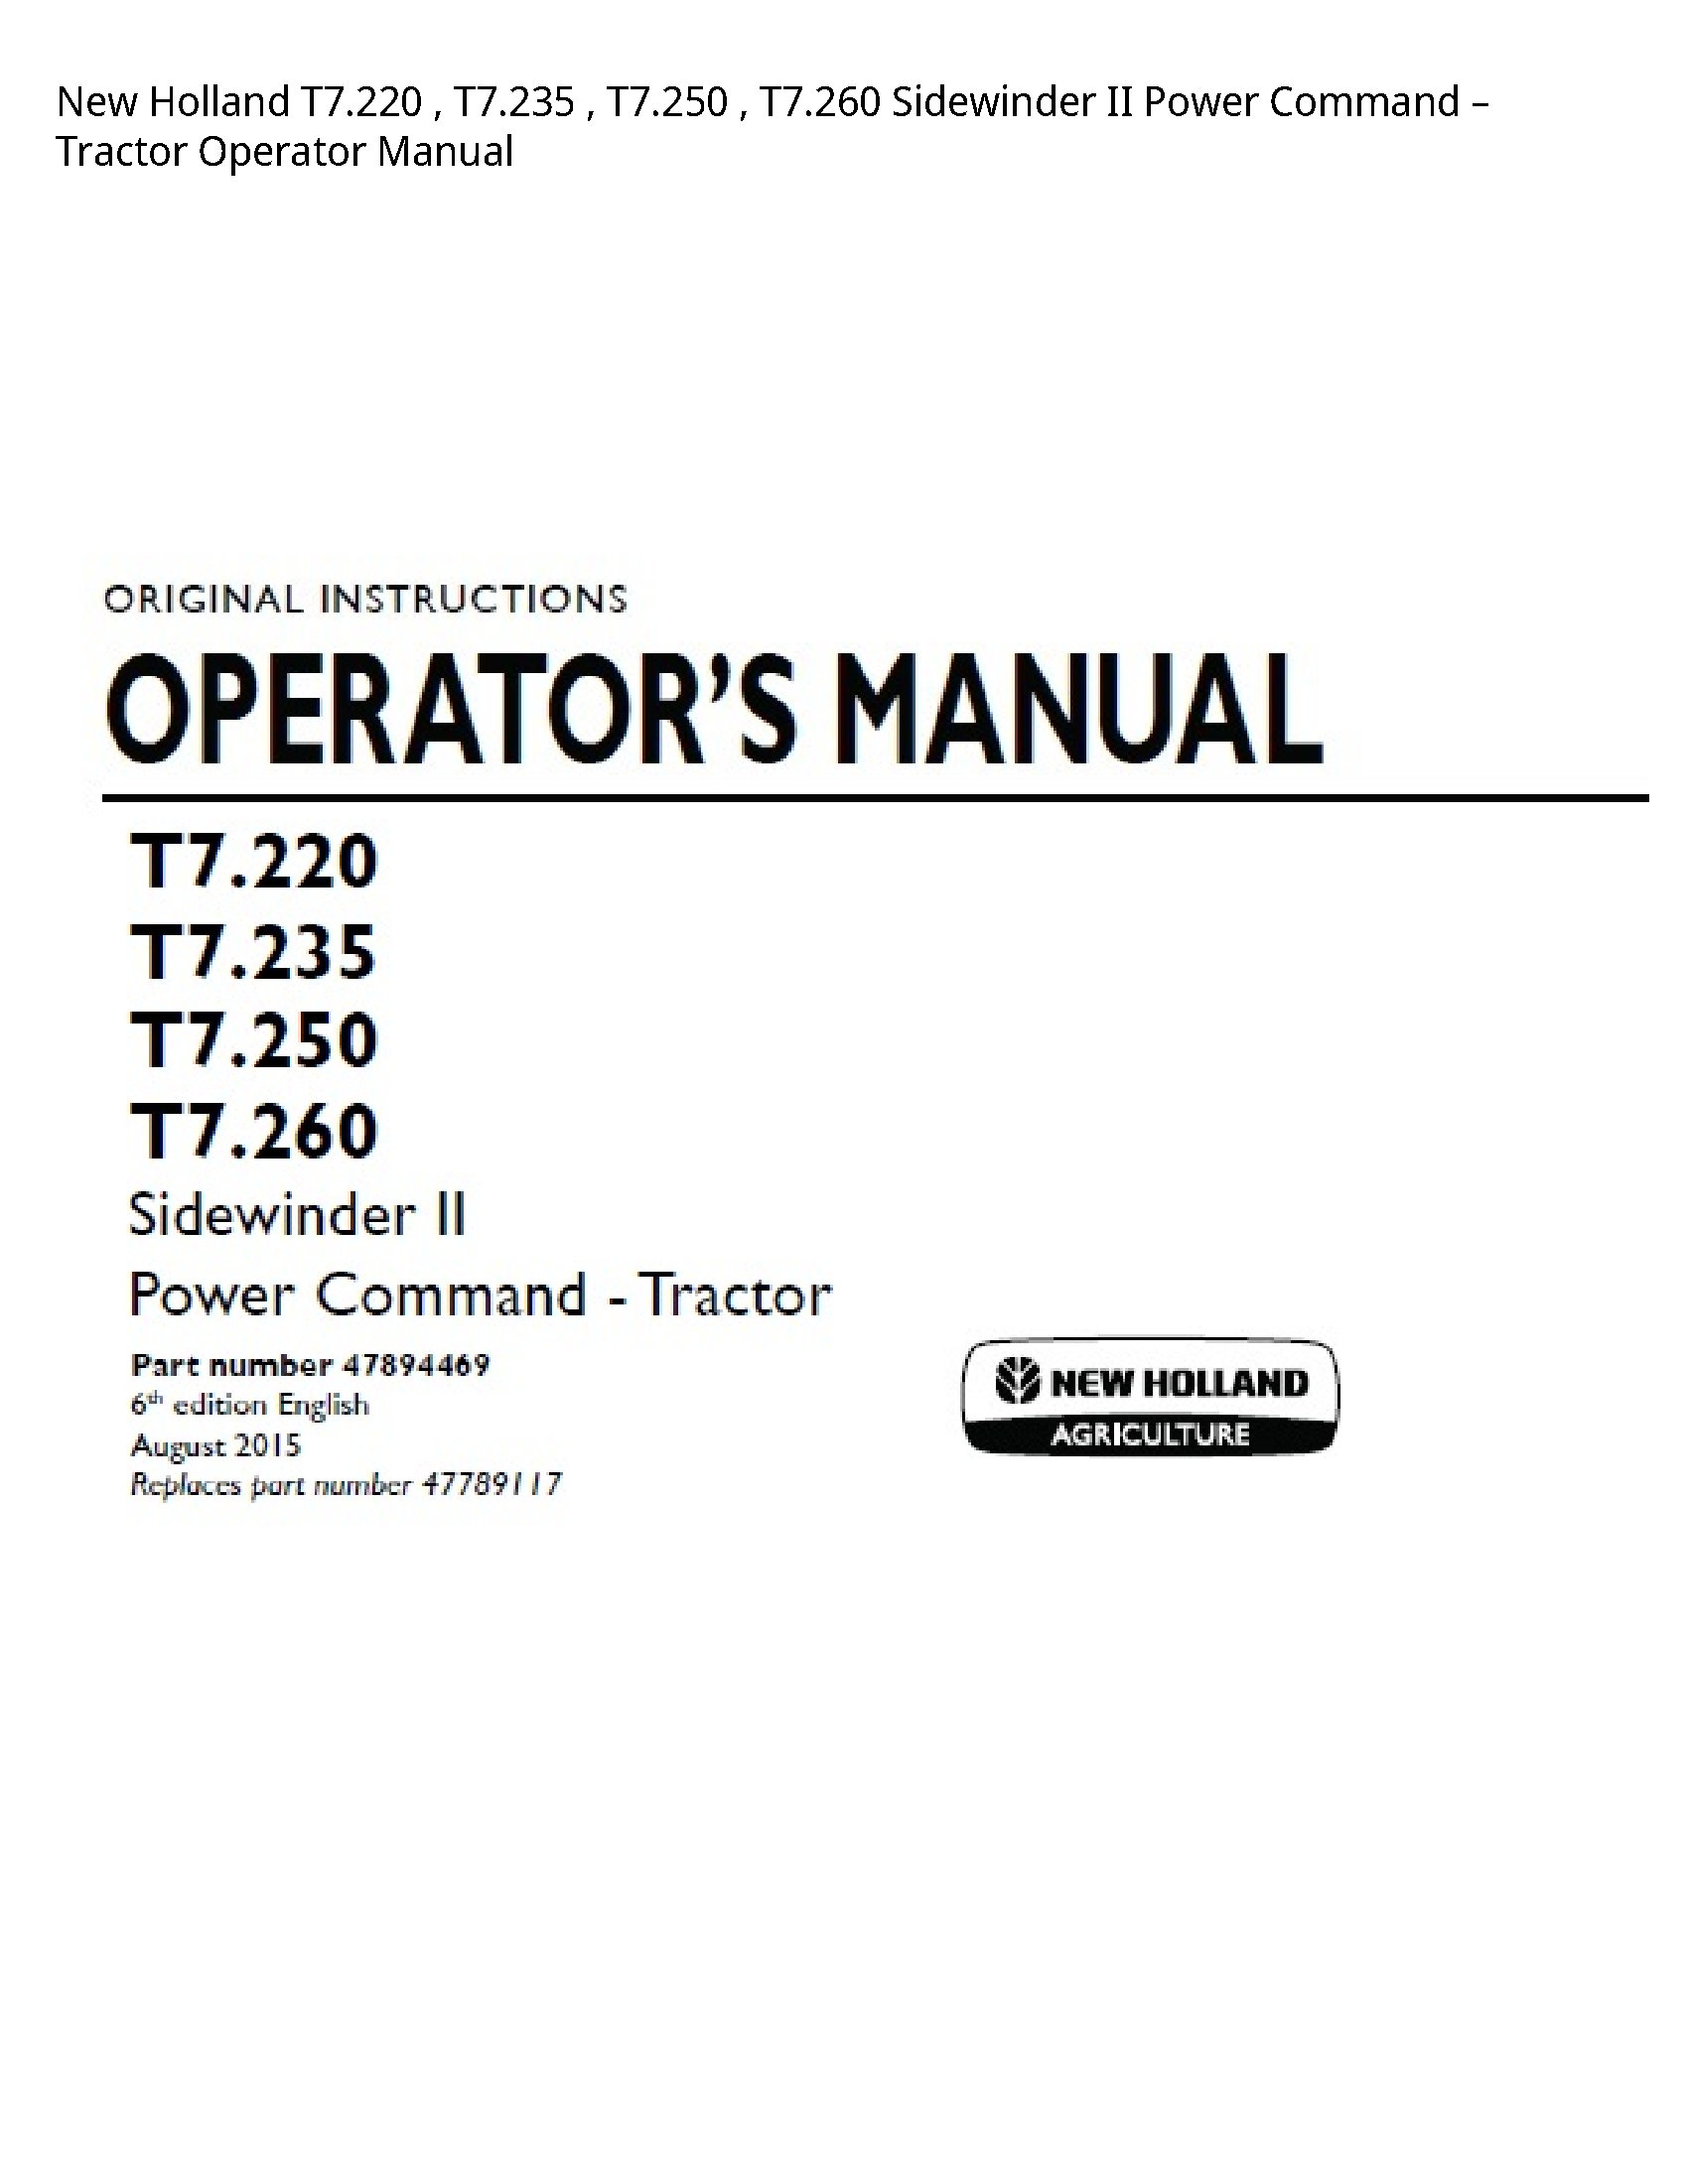 New Holland T7.220 Sidewinder II Power Command Tractor Operator manual